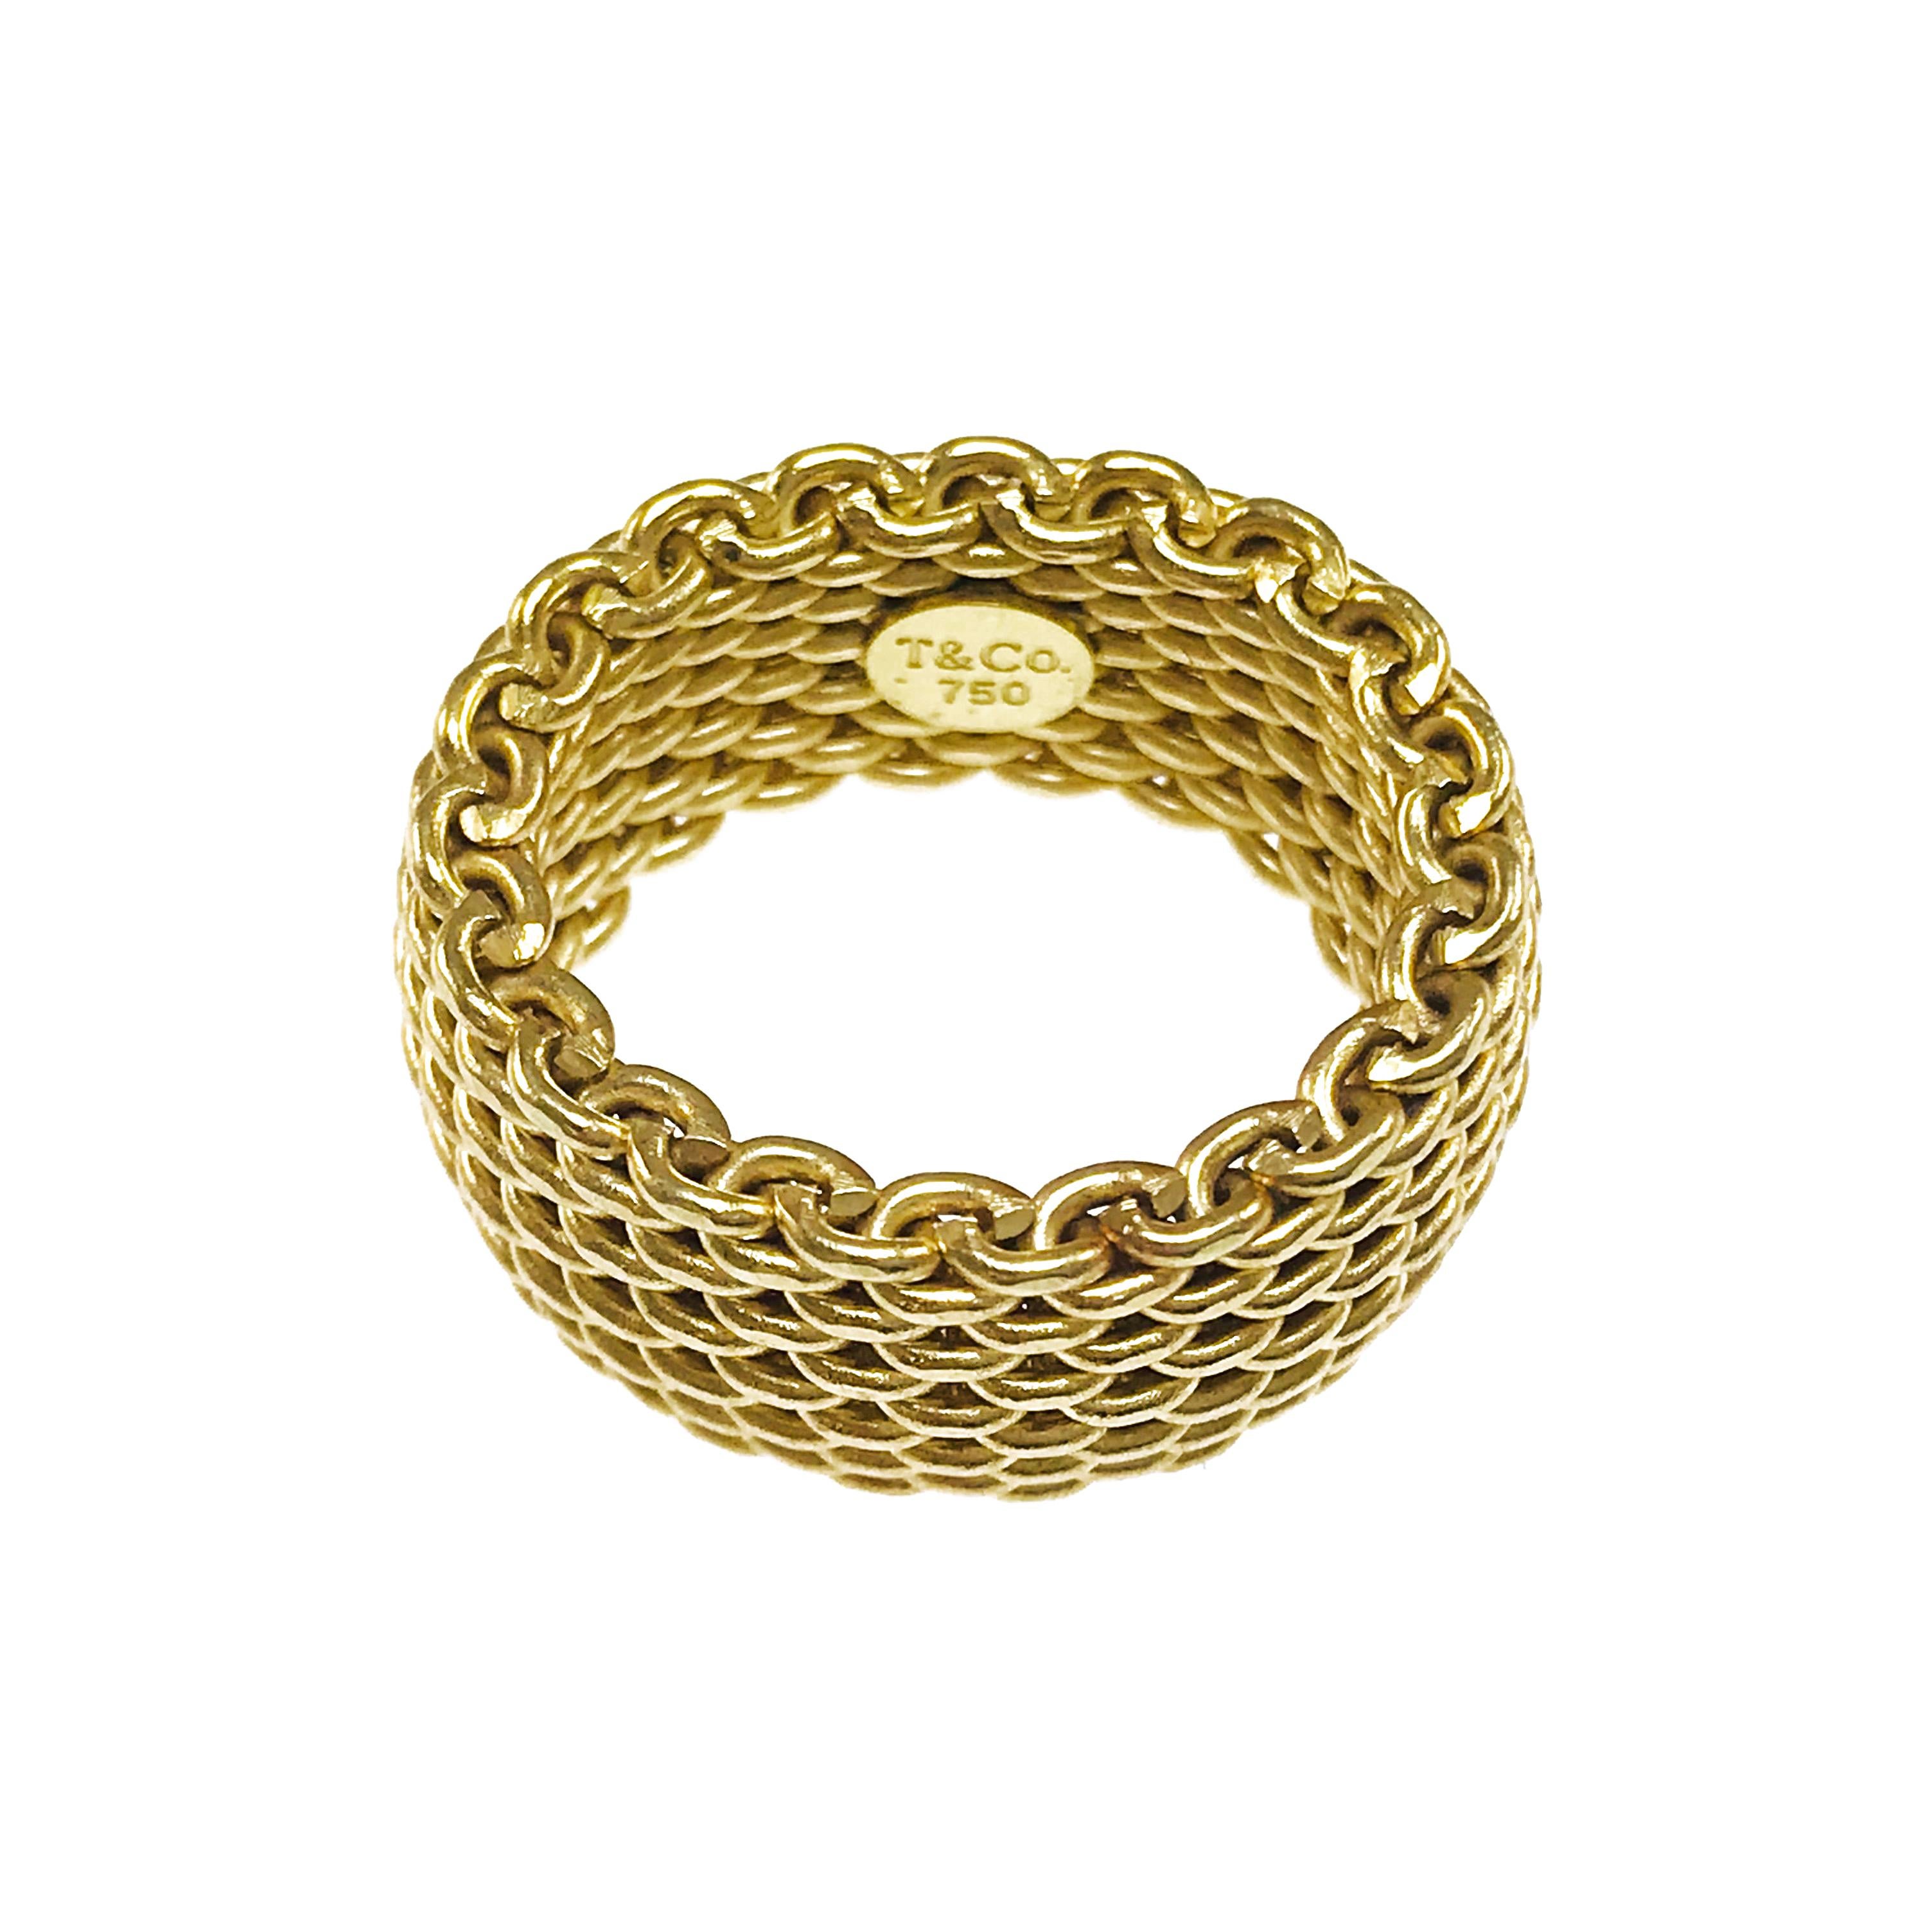 Tiffany & Co. 18 Karat Somerset Yellow Gold Mesh Ring. A fabulous wide ring with a continuous bold and intricate mesh design, a statement on it's own or paired with the matching bangle bracelet (see our storefront). Stamped on the inside is T&Co.